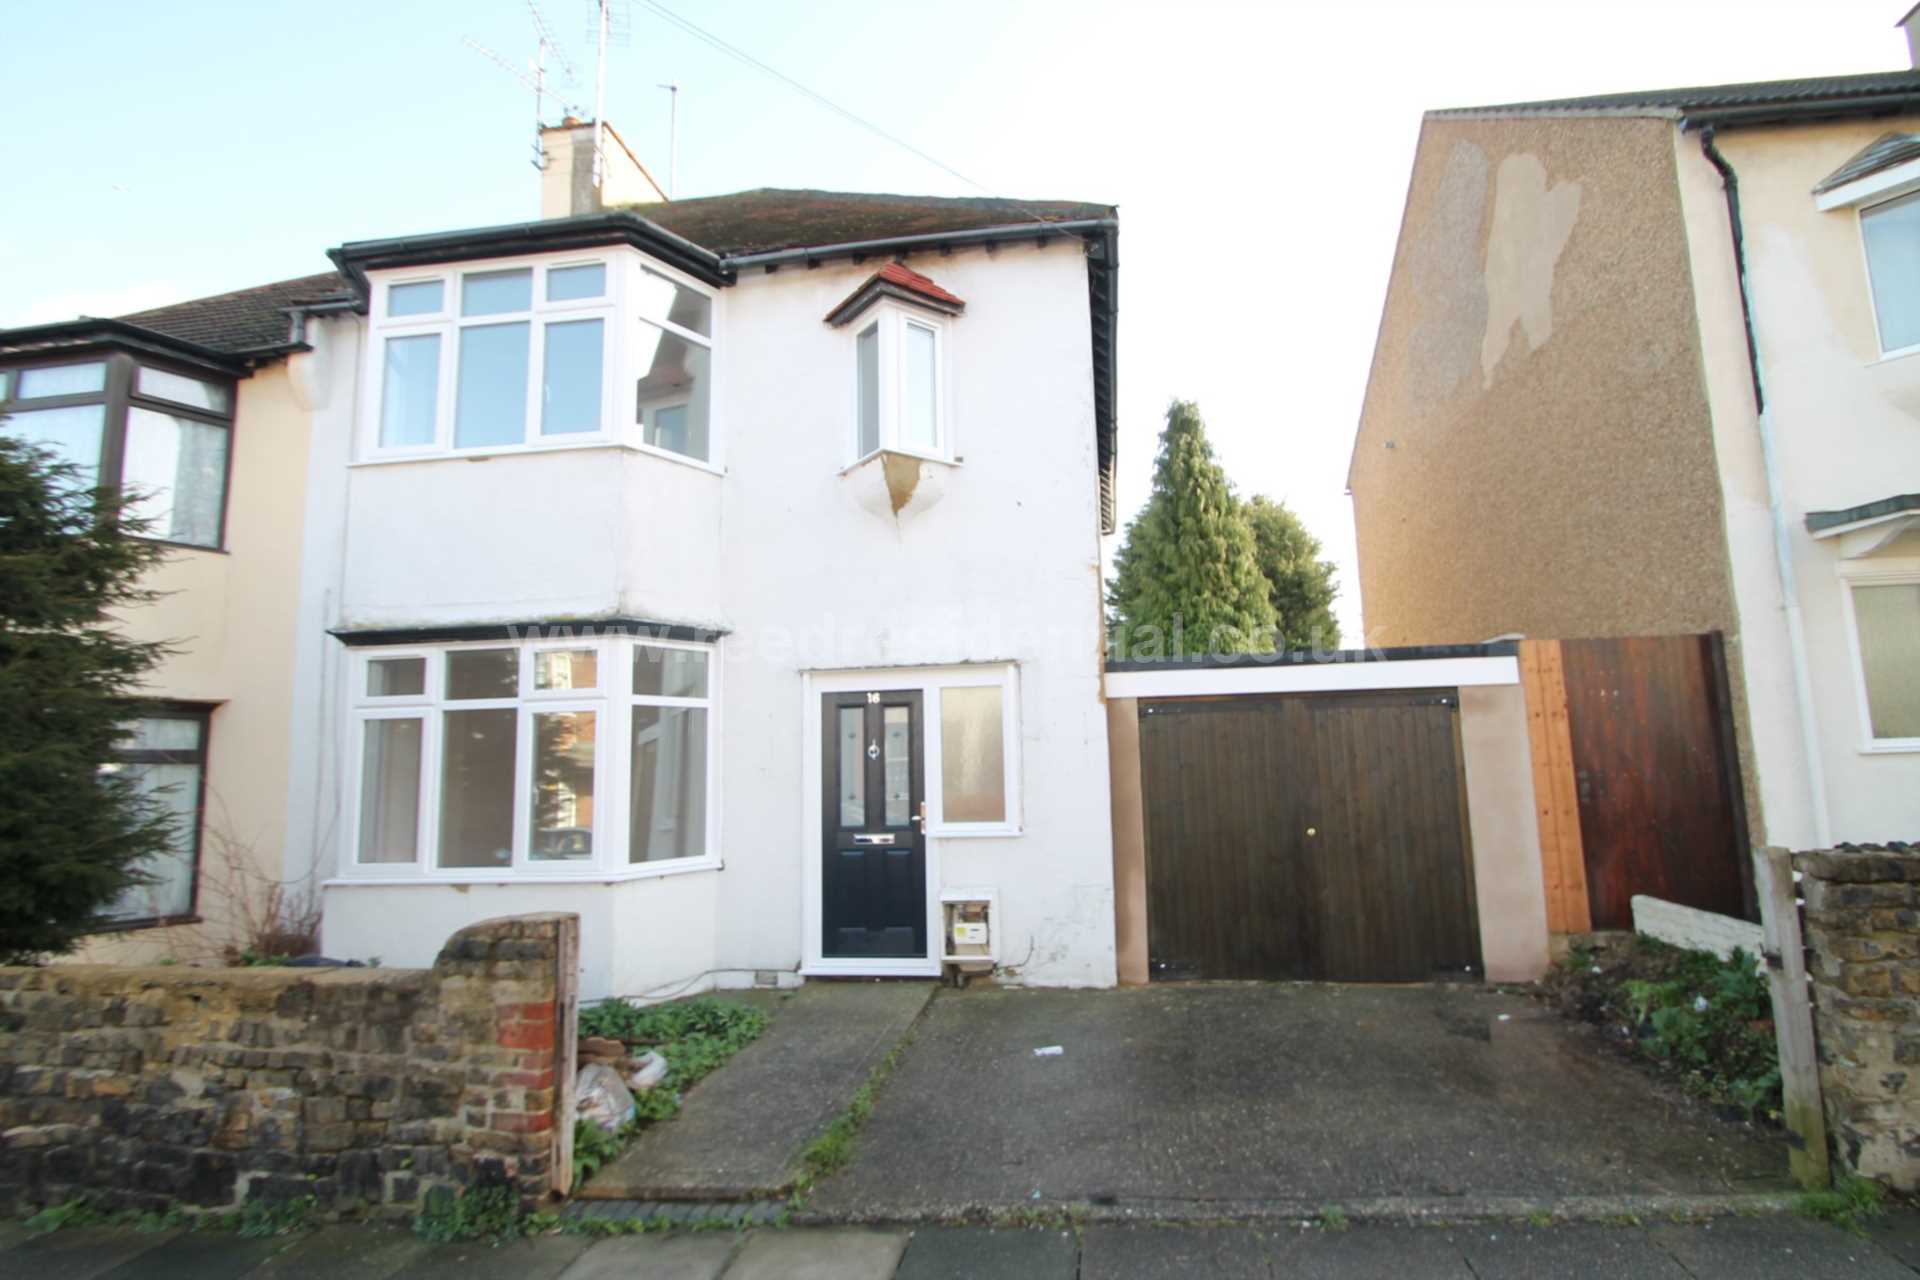 3 bed House (unspecified) for rent in Westcliff On Sea. From Reed Residential - Westcliff on Sea